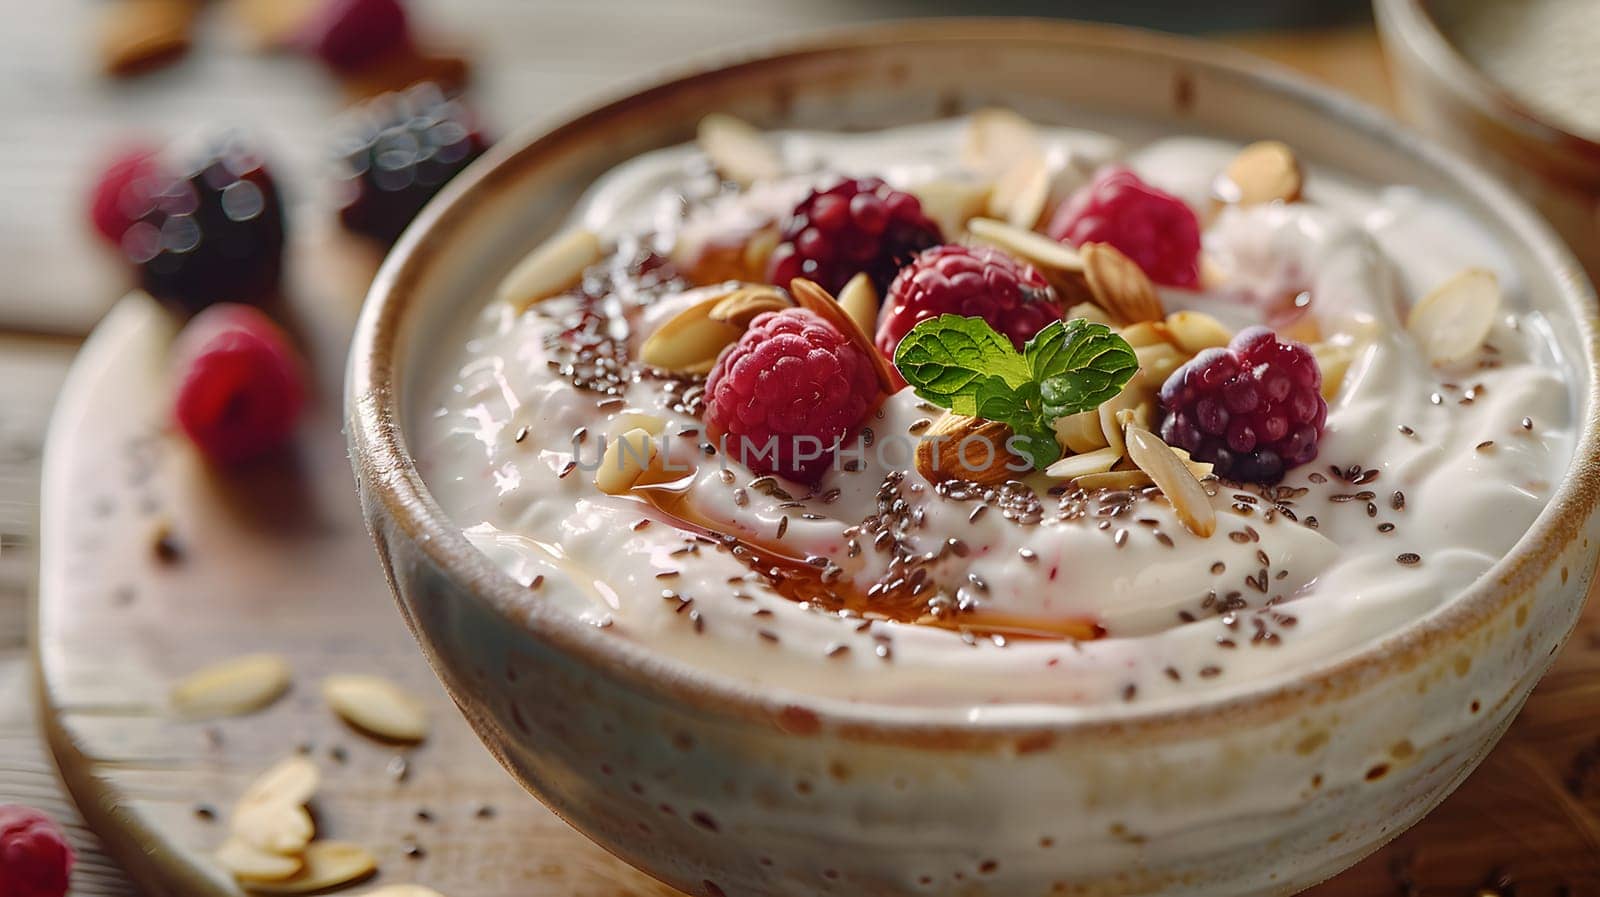 A nutritious dish made of yogurt topped with raspberries and almonds, a delicious combination of fruit and superfood on a tableware